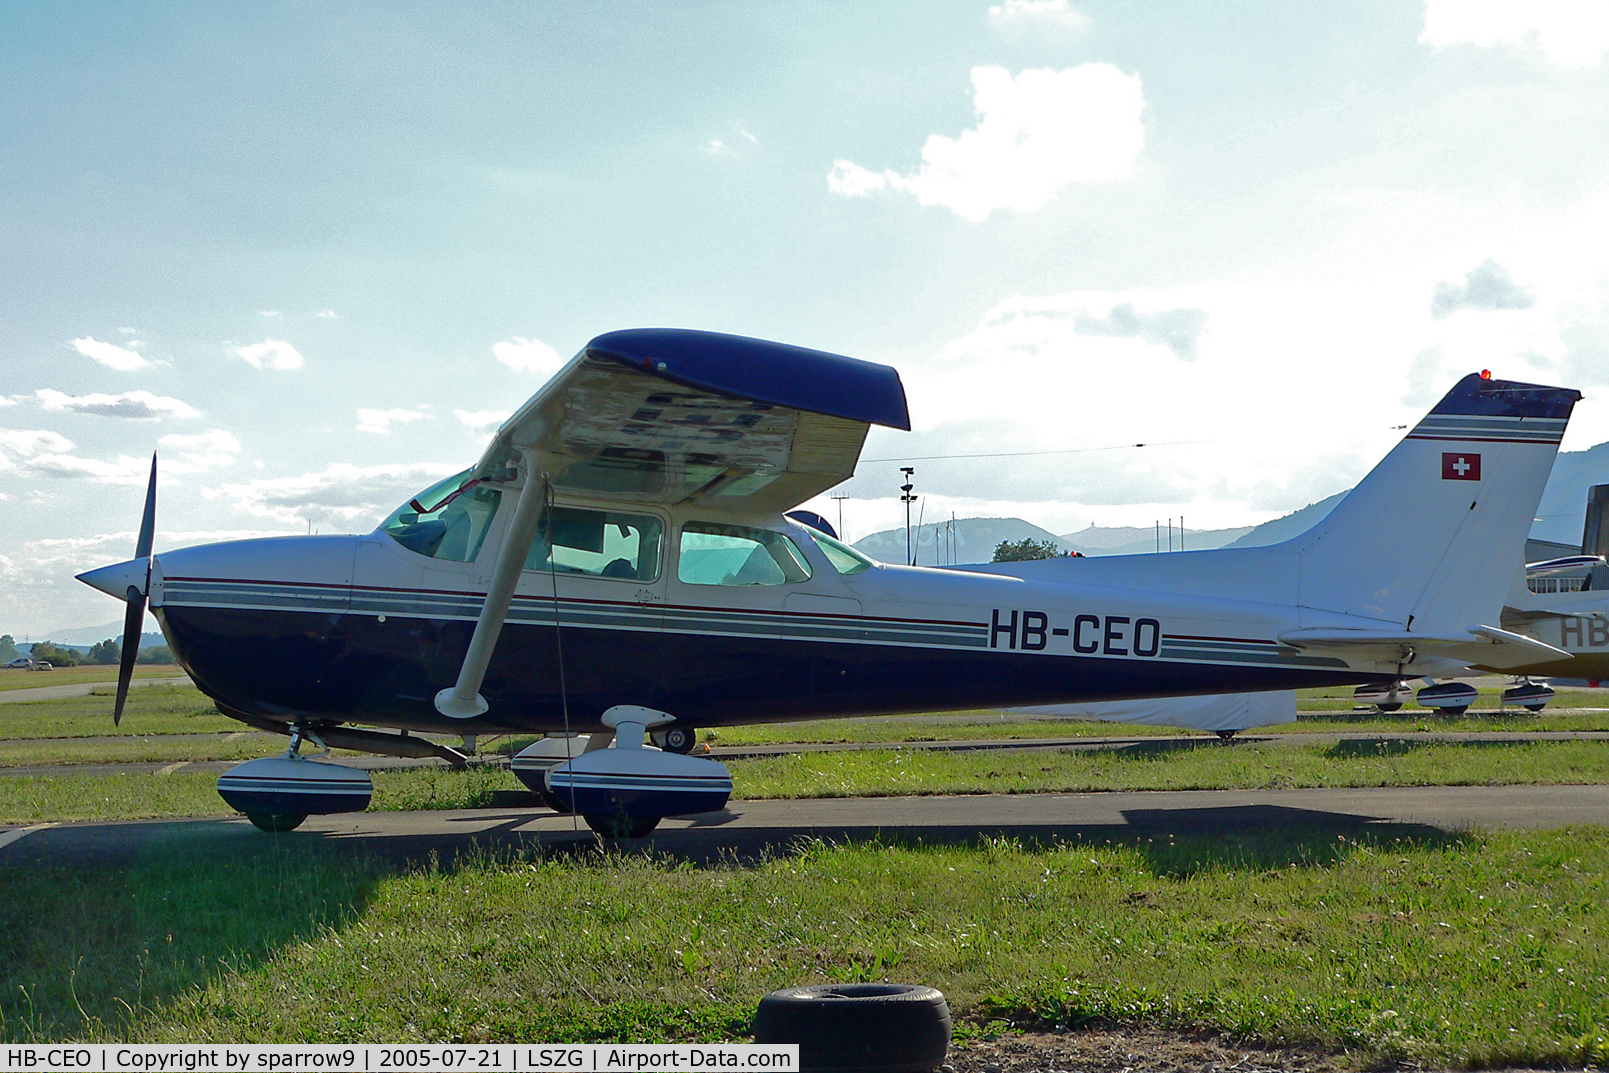 HB-CEO, 1975 Cessna 172M Skyhawk C/N 17265929, The weather is better now. Gomolzig silencer with a 180 HP Lycoming. HB-registered 1977-05-12 until 2017-06-21. Damaged in landing accident .